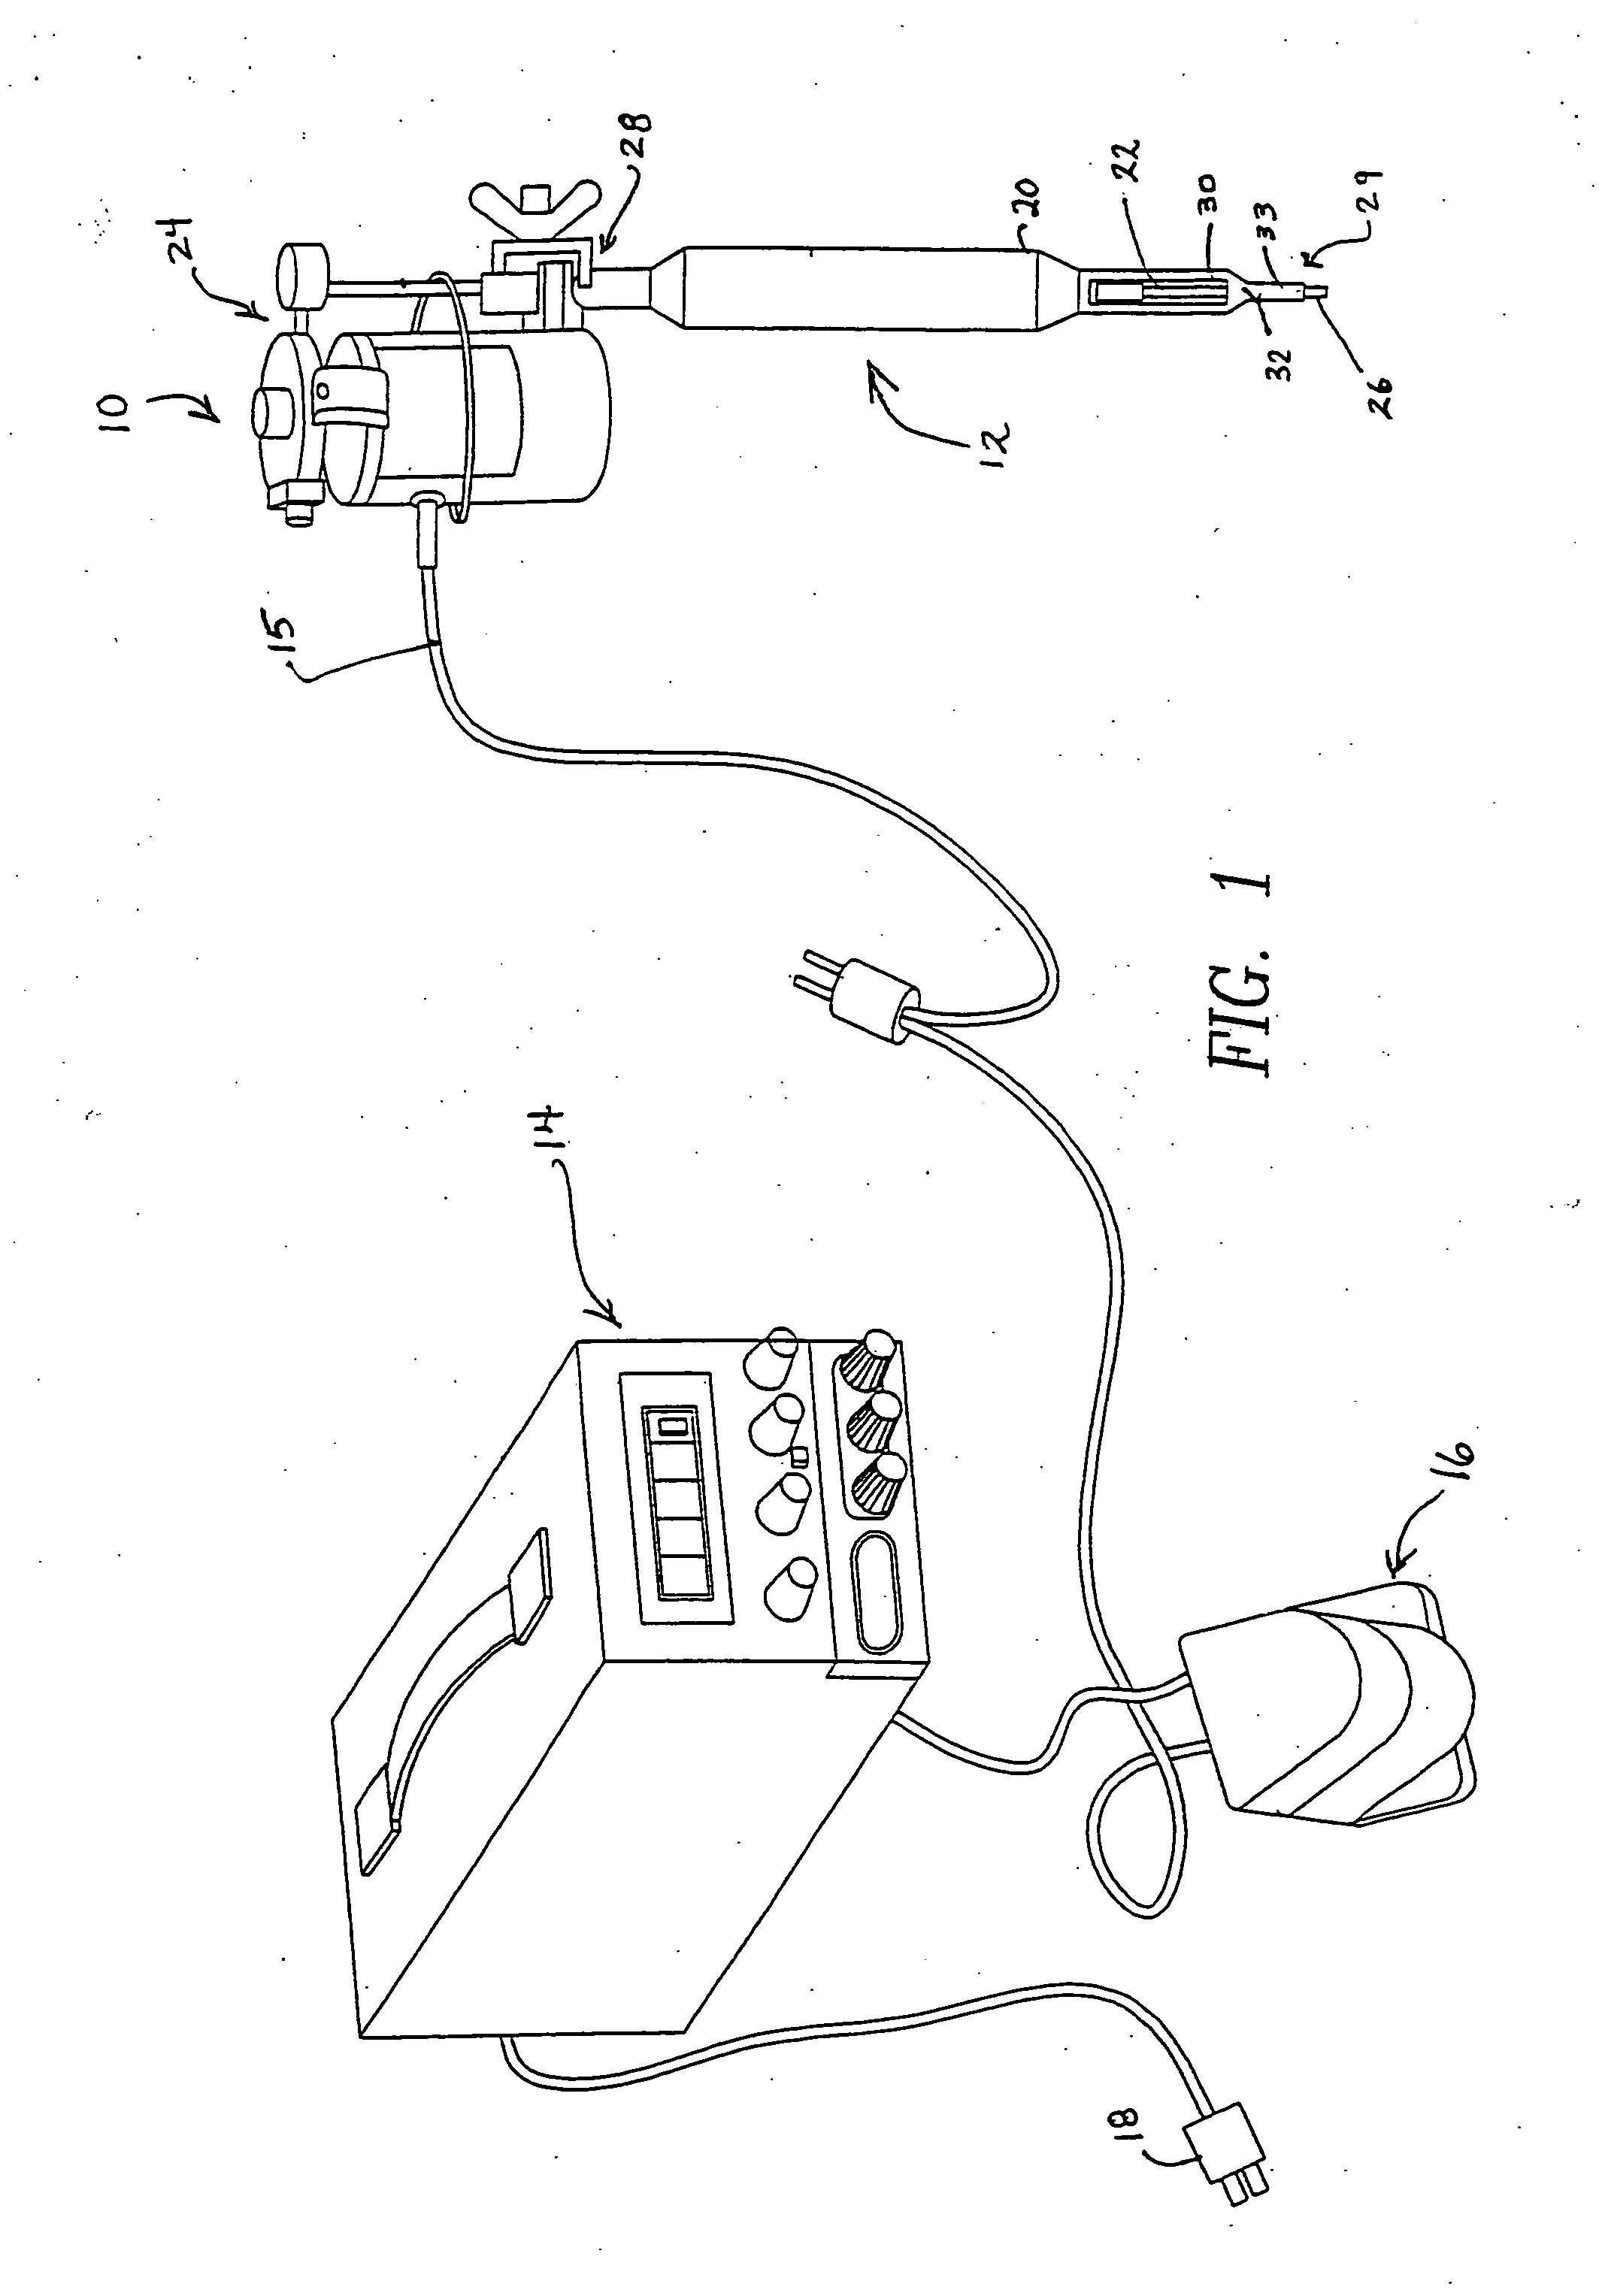 Method and apparatus for treating scar tissue